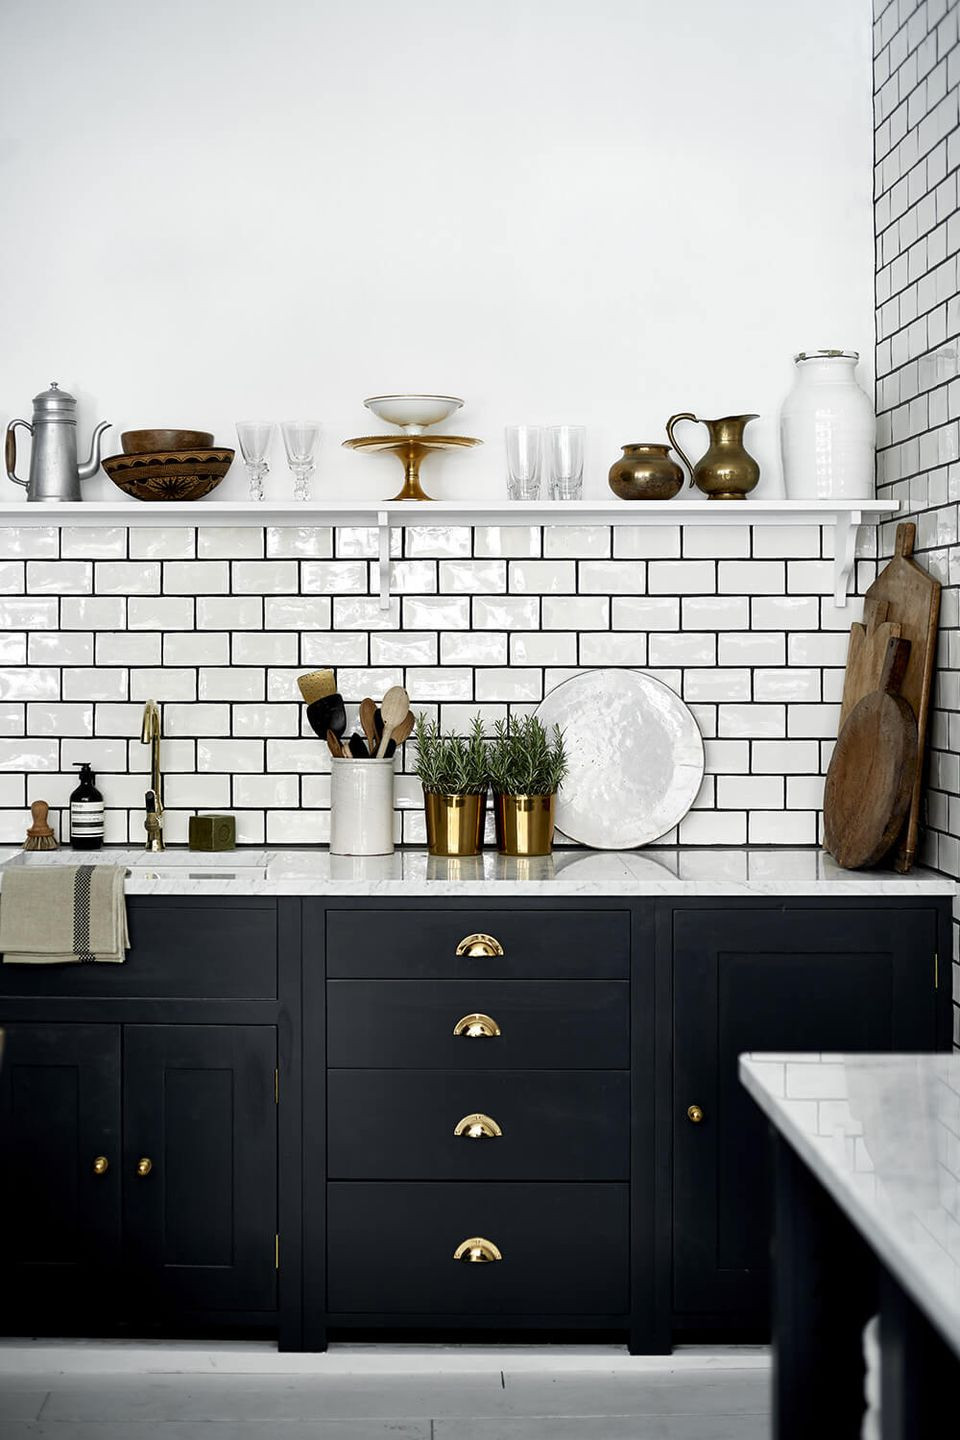 Subway Tile Colors Kitchen
 19 Ways to Use Subway Tile in the Kitchen